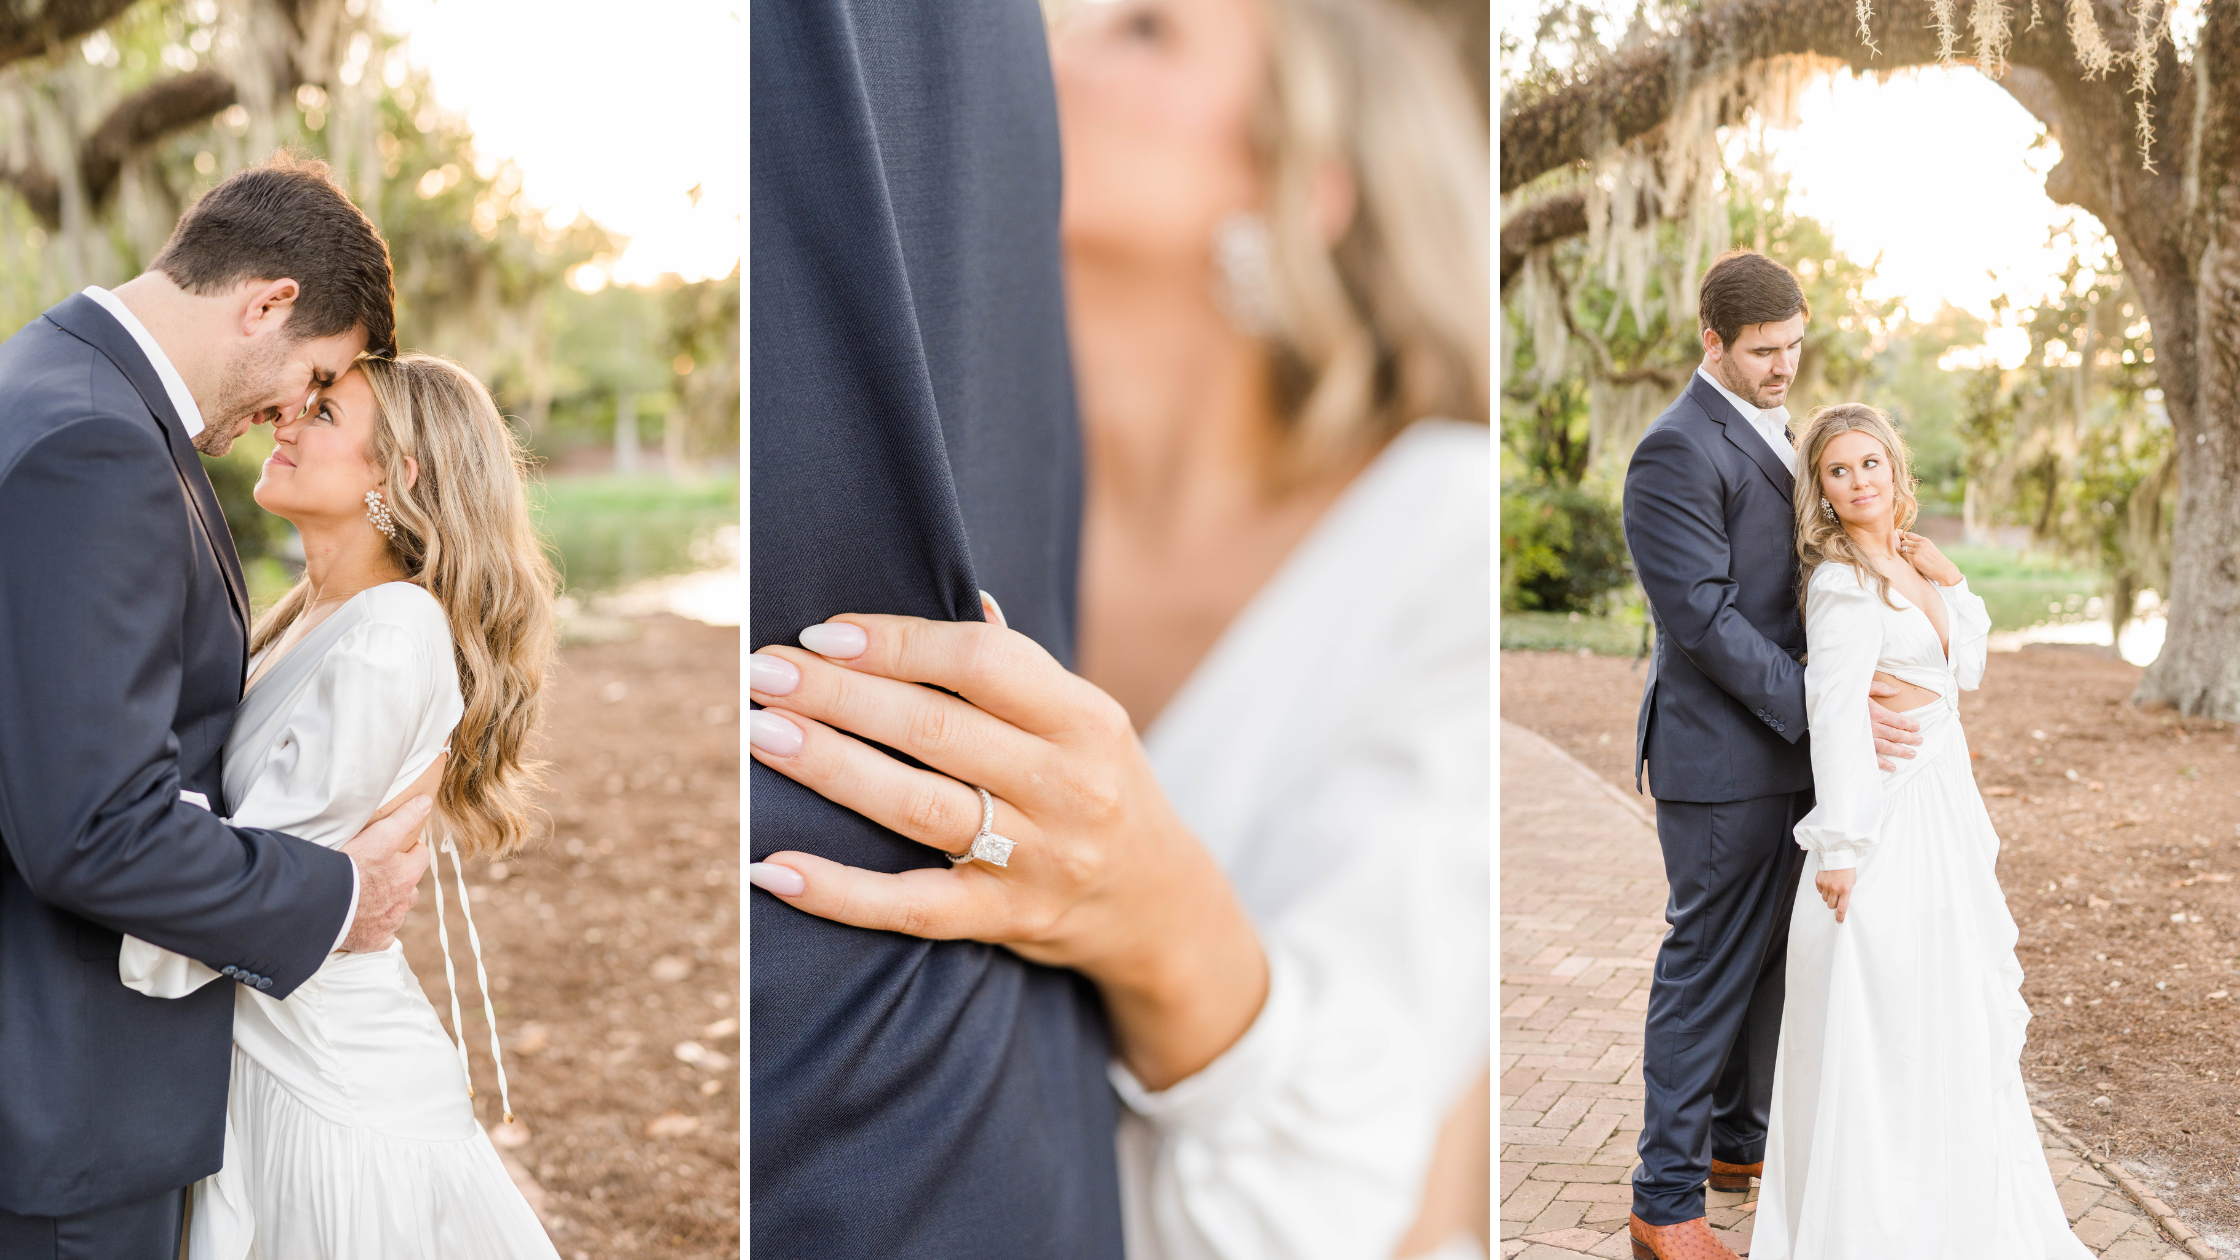 The Grand Hotel Fairhope Alabama Engagement Photoshoot photographed by Kristen Marcus Photography